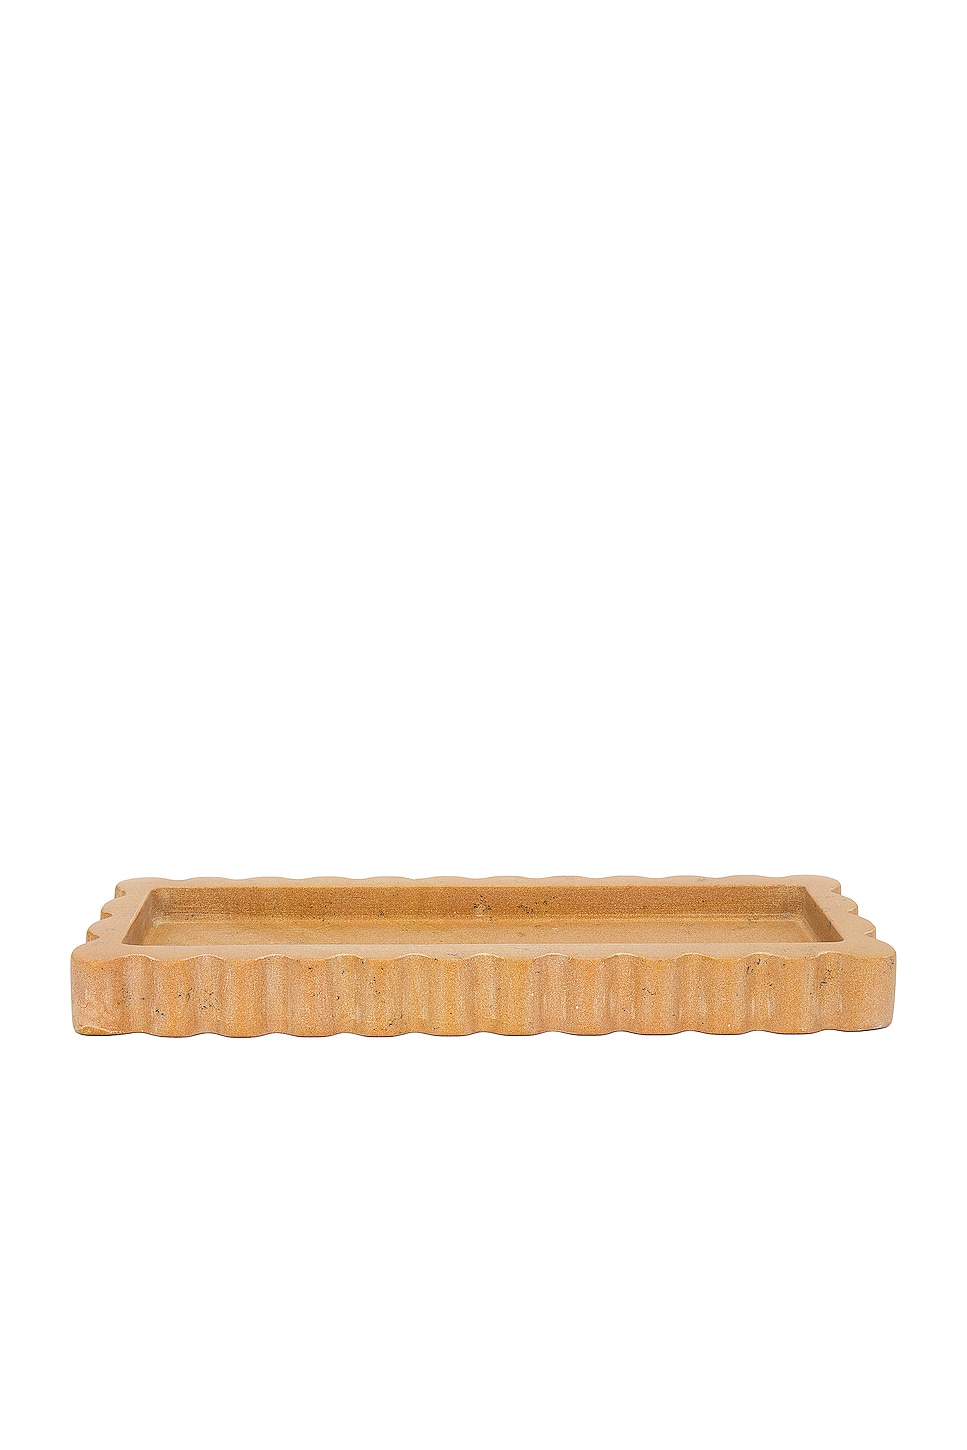 Image 1 of Anastasio Home The 512 Tray in Honeycomb